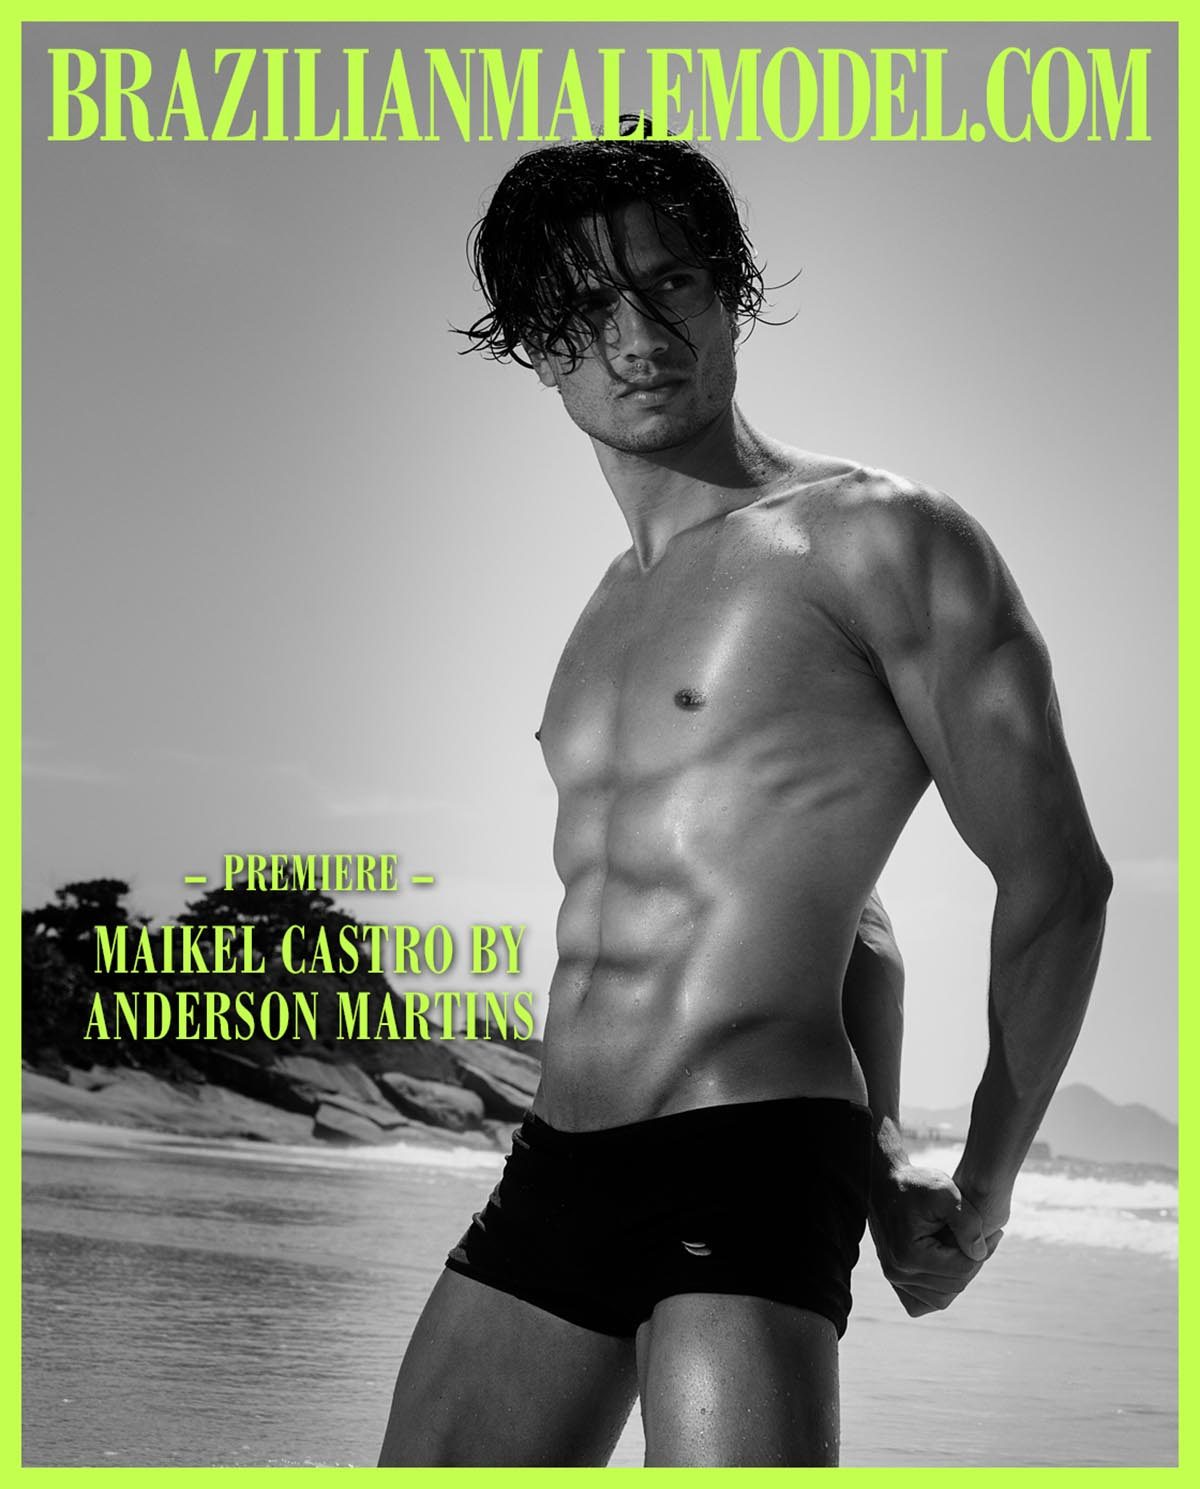 Maikel Castro by Anderson Martins